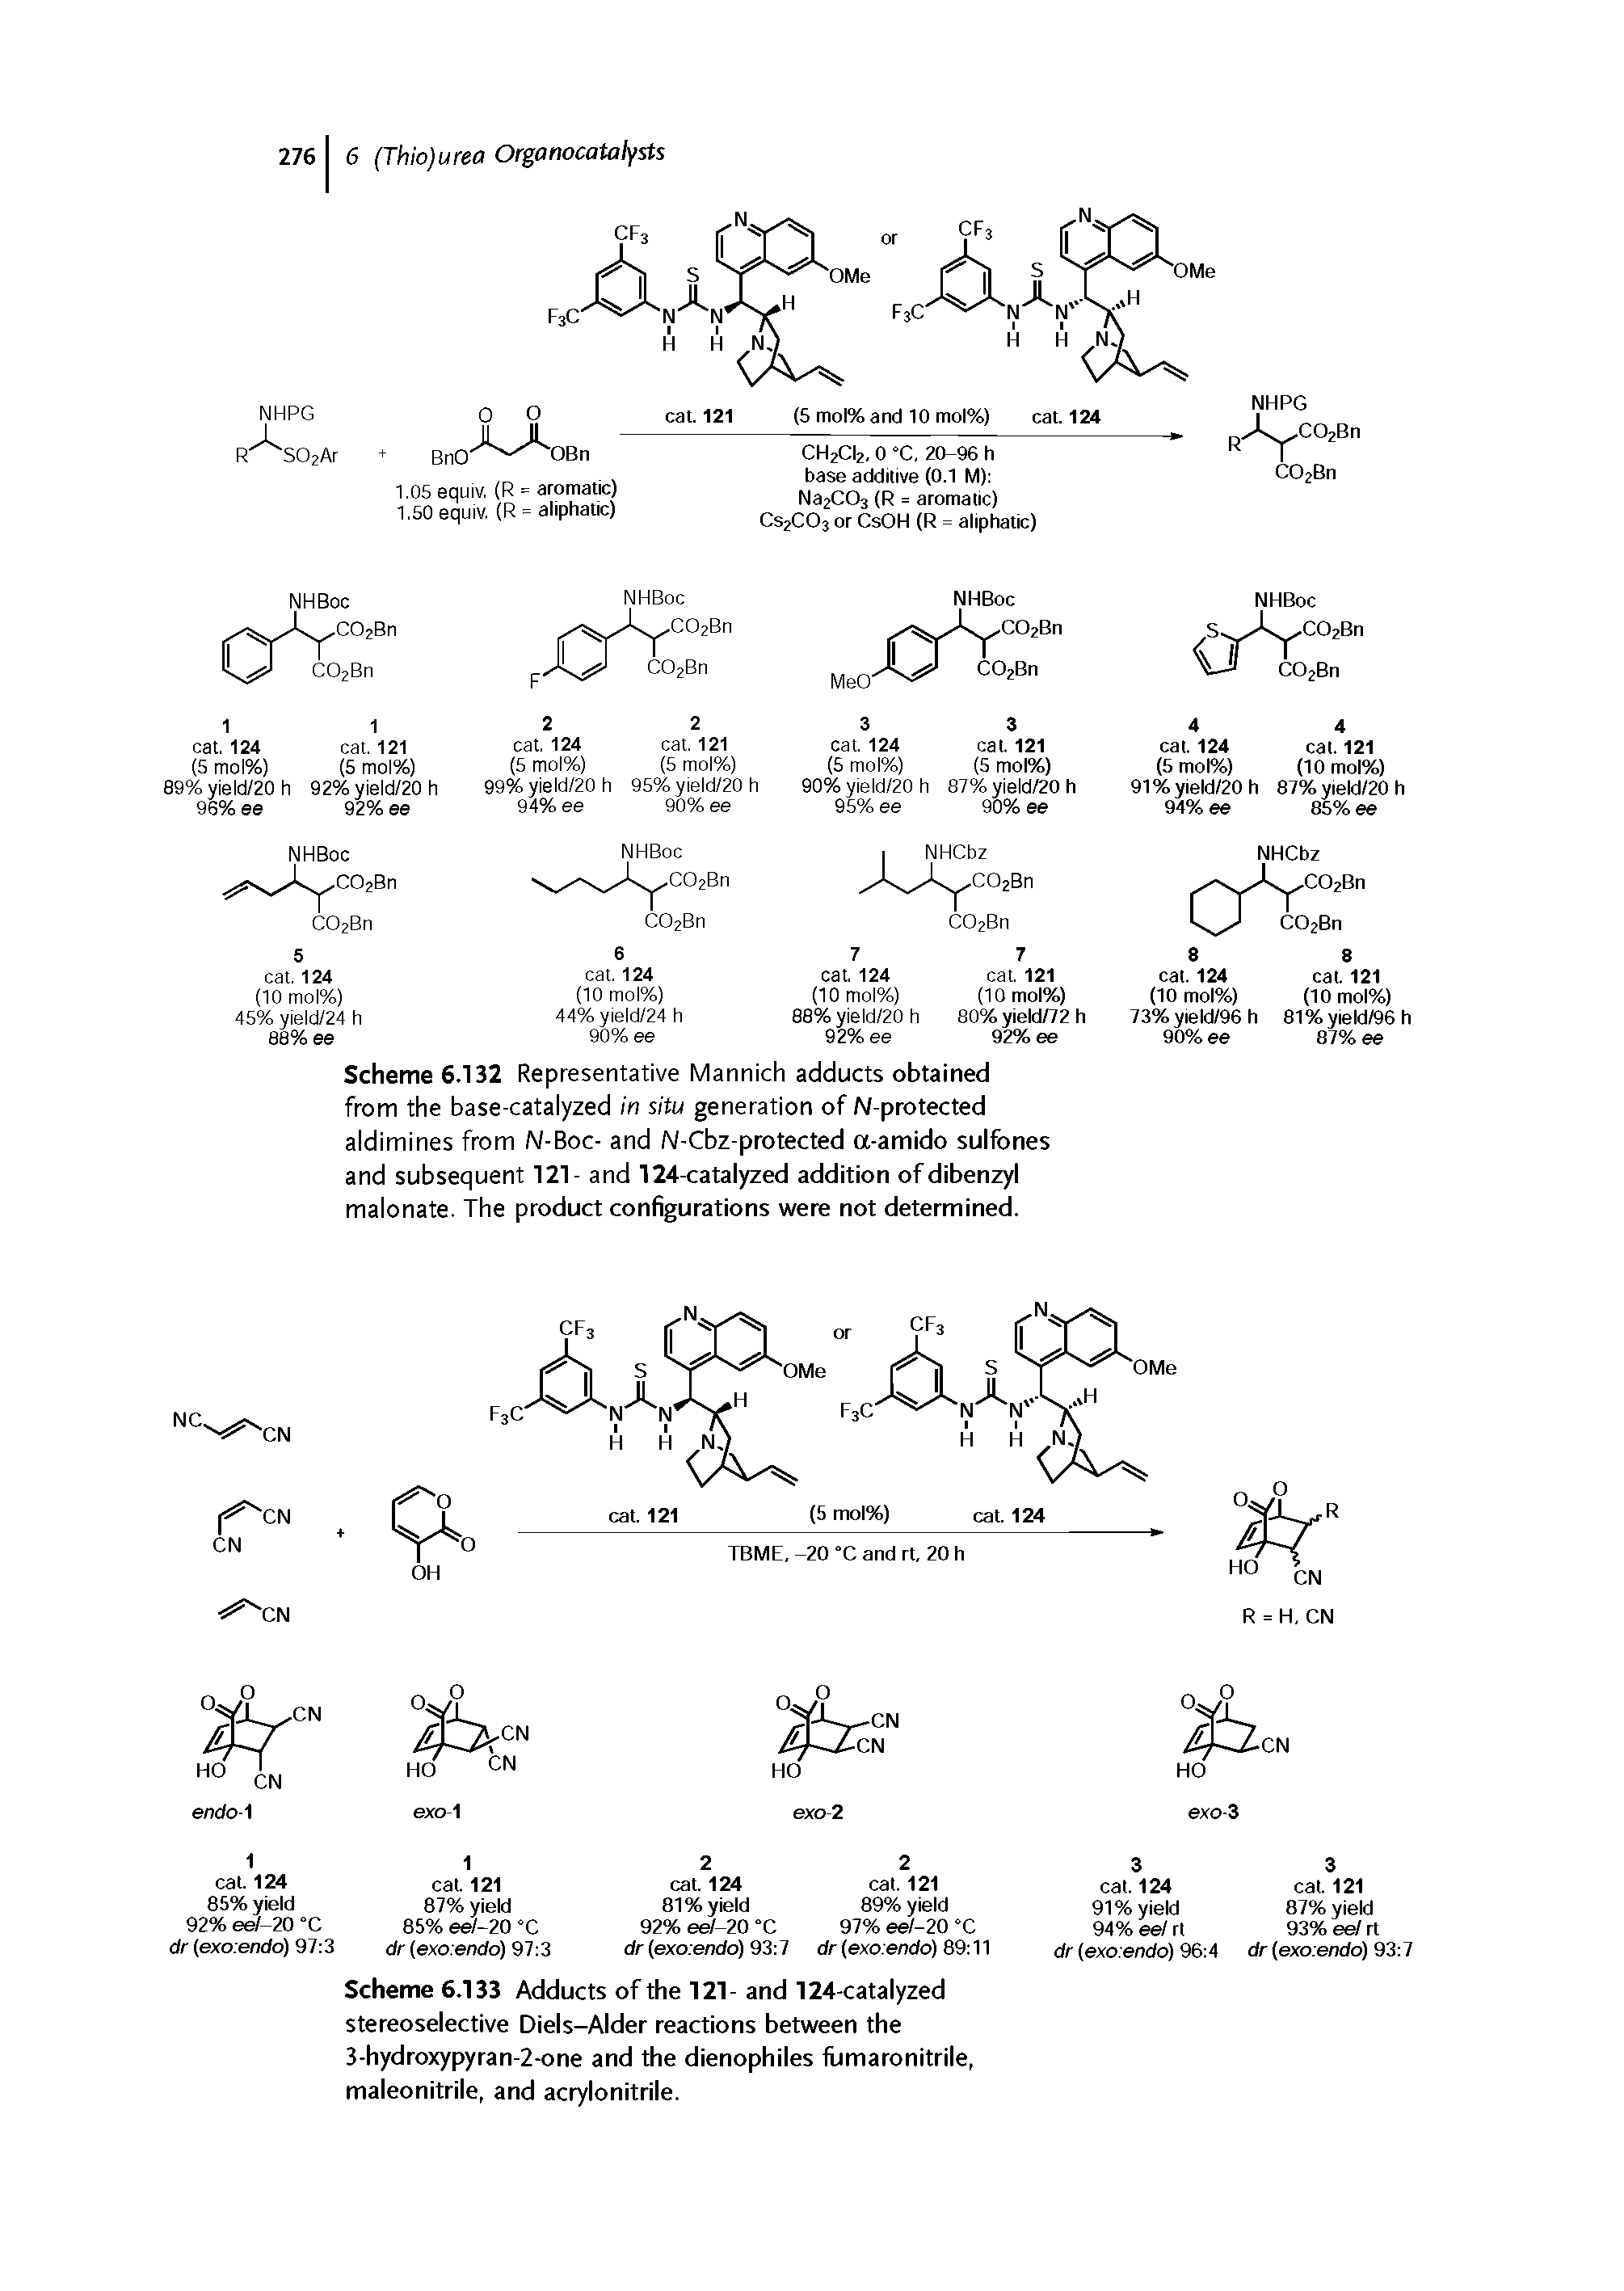 Scheme 6.133 Adducts of the 121- and 124-catalyzed stereoselective Diels-Alder reactions between the 3-hydroxypyran-2-one and the dienophiles flimaronitrile, maleonitrile, and acrylonitrile.